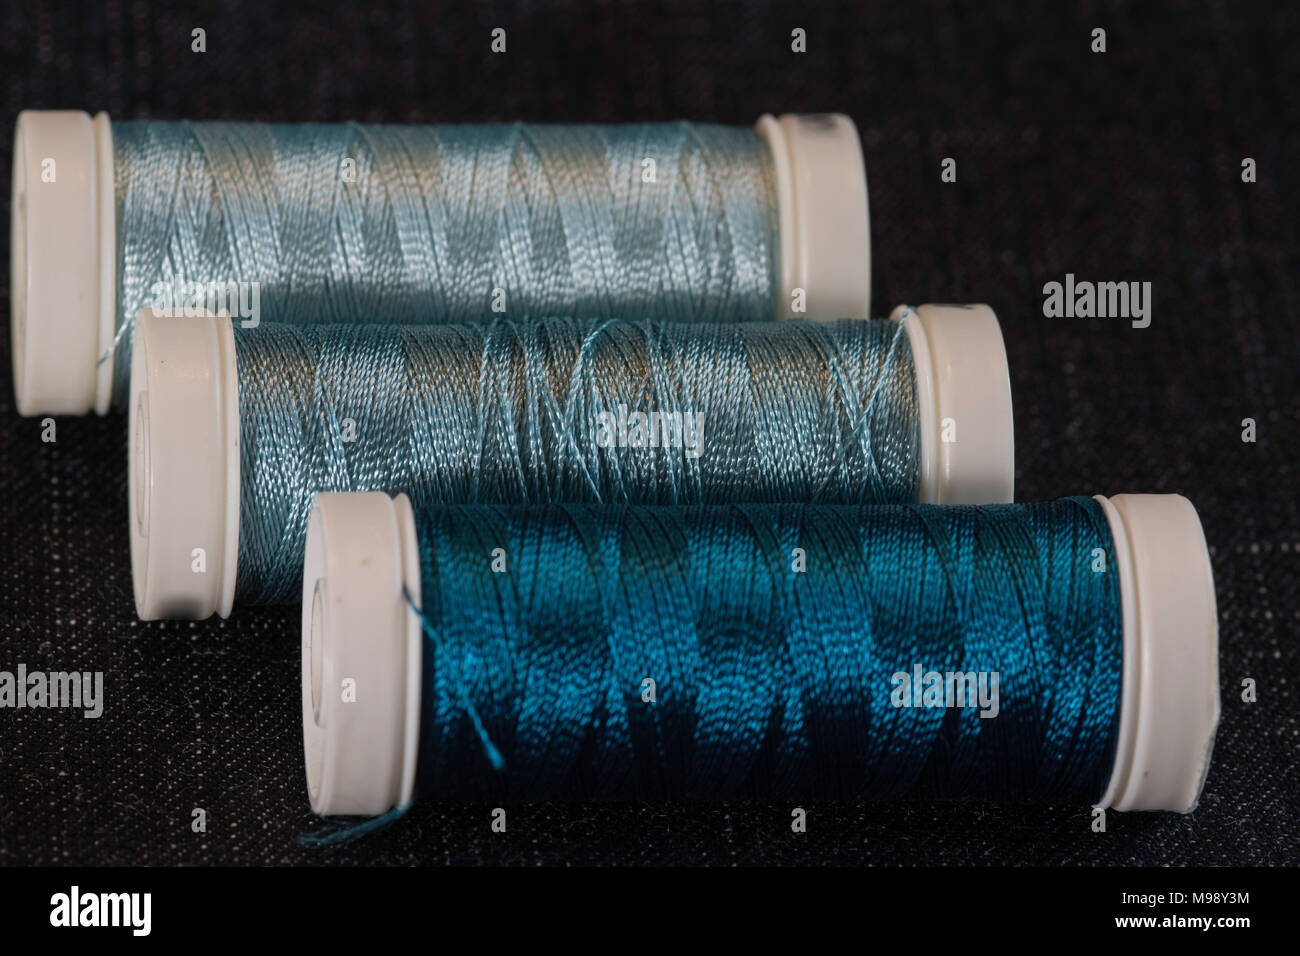 assorted spools of teal blue sewing thread Stock Photo